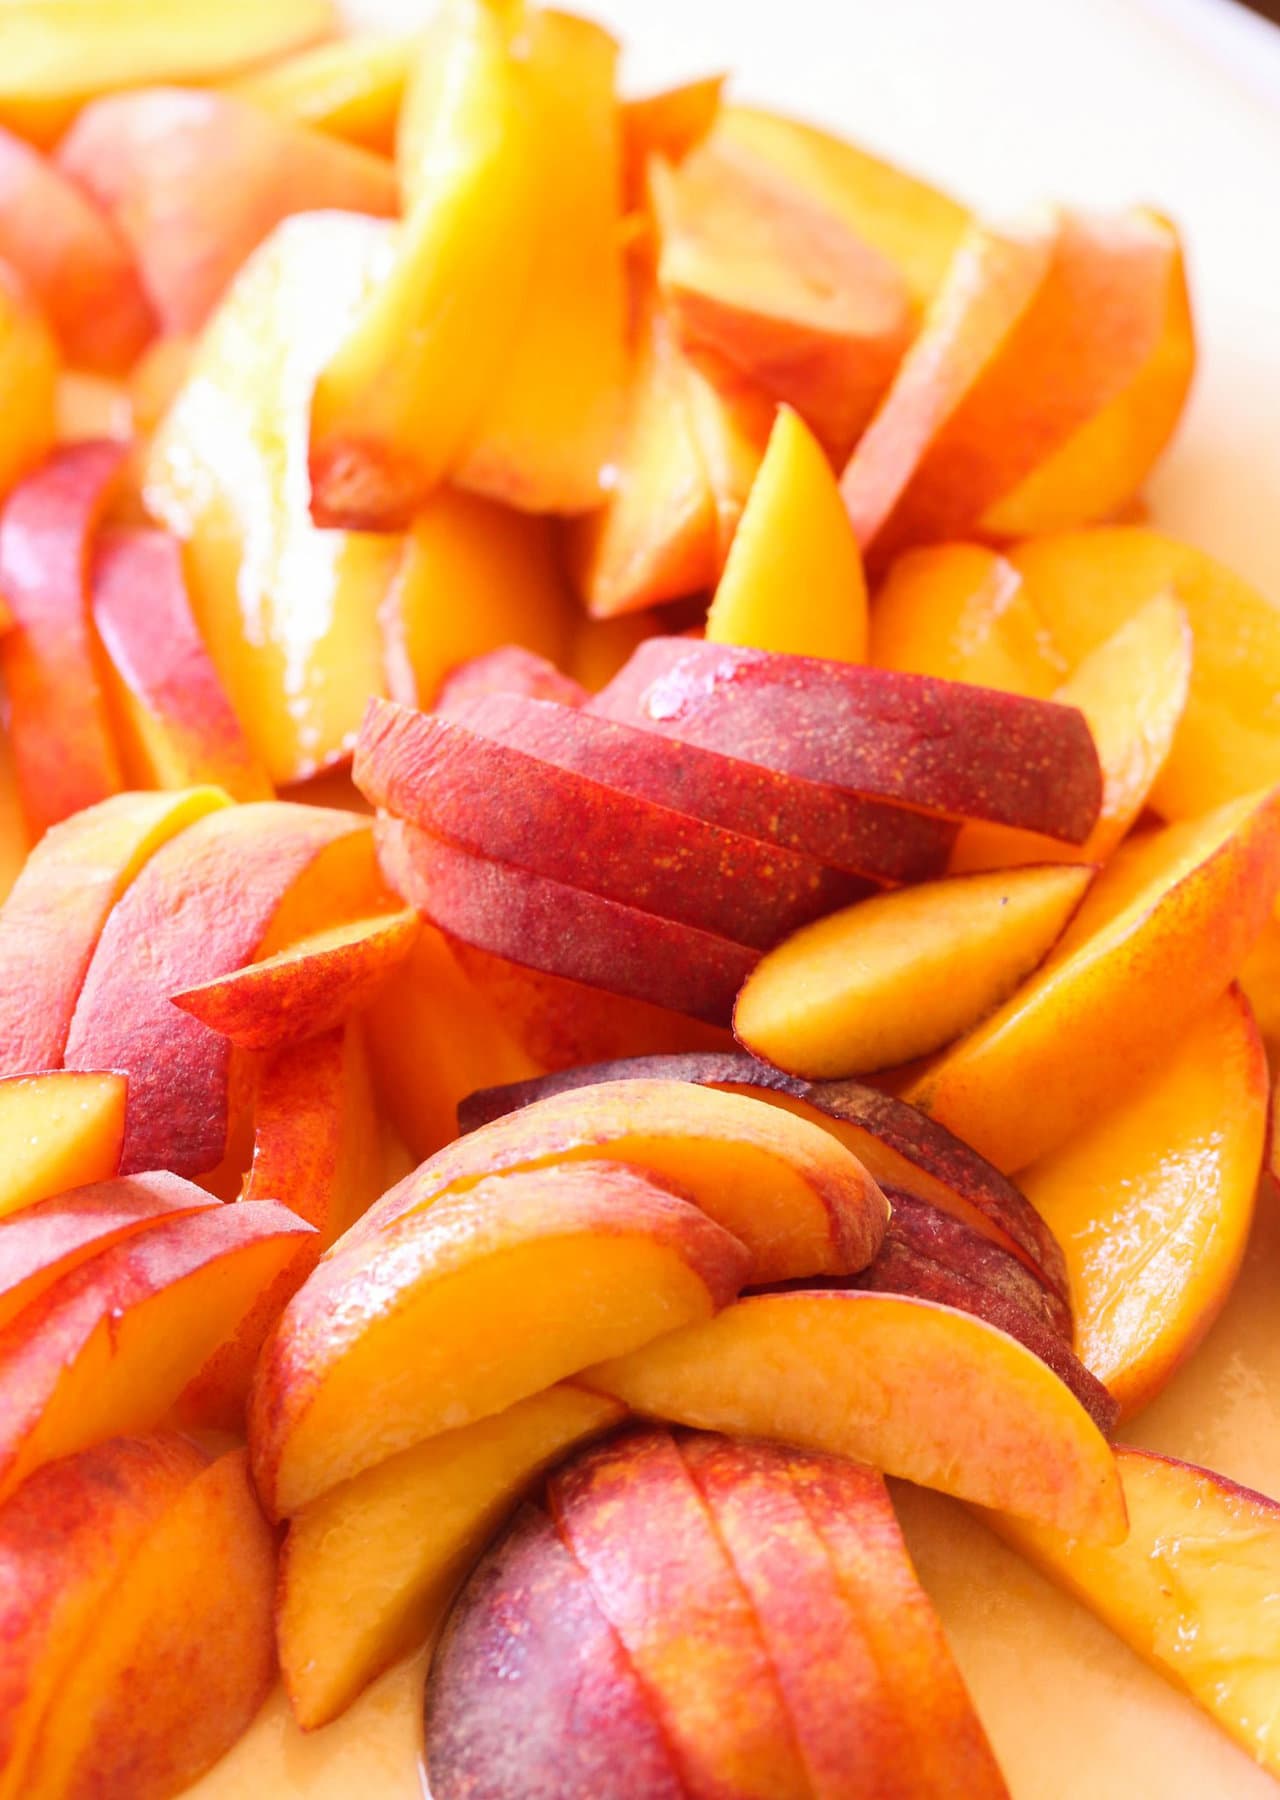 Peaches sliced and served